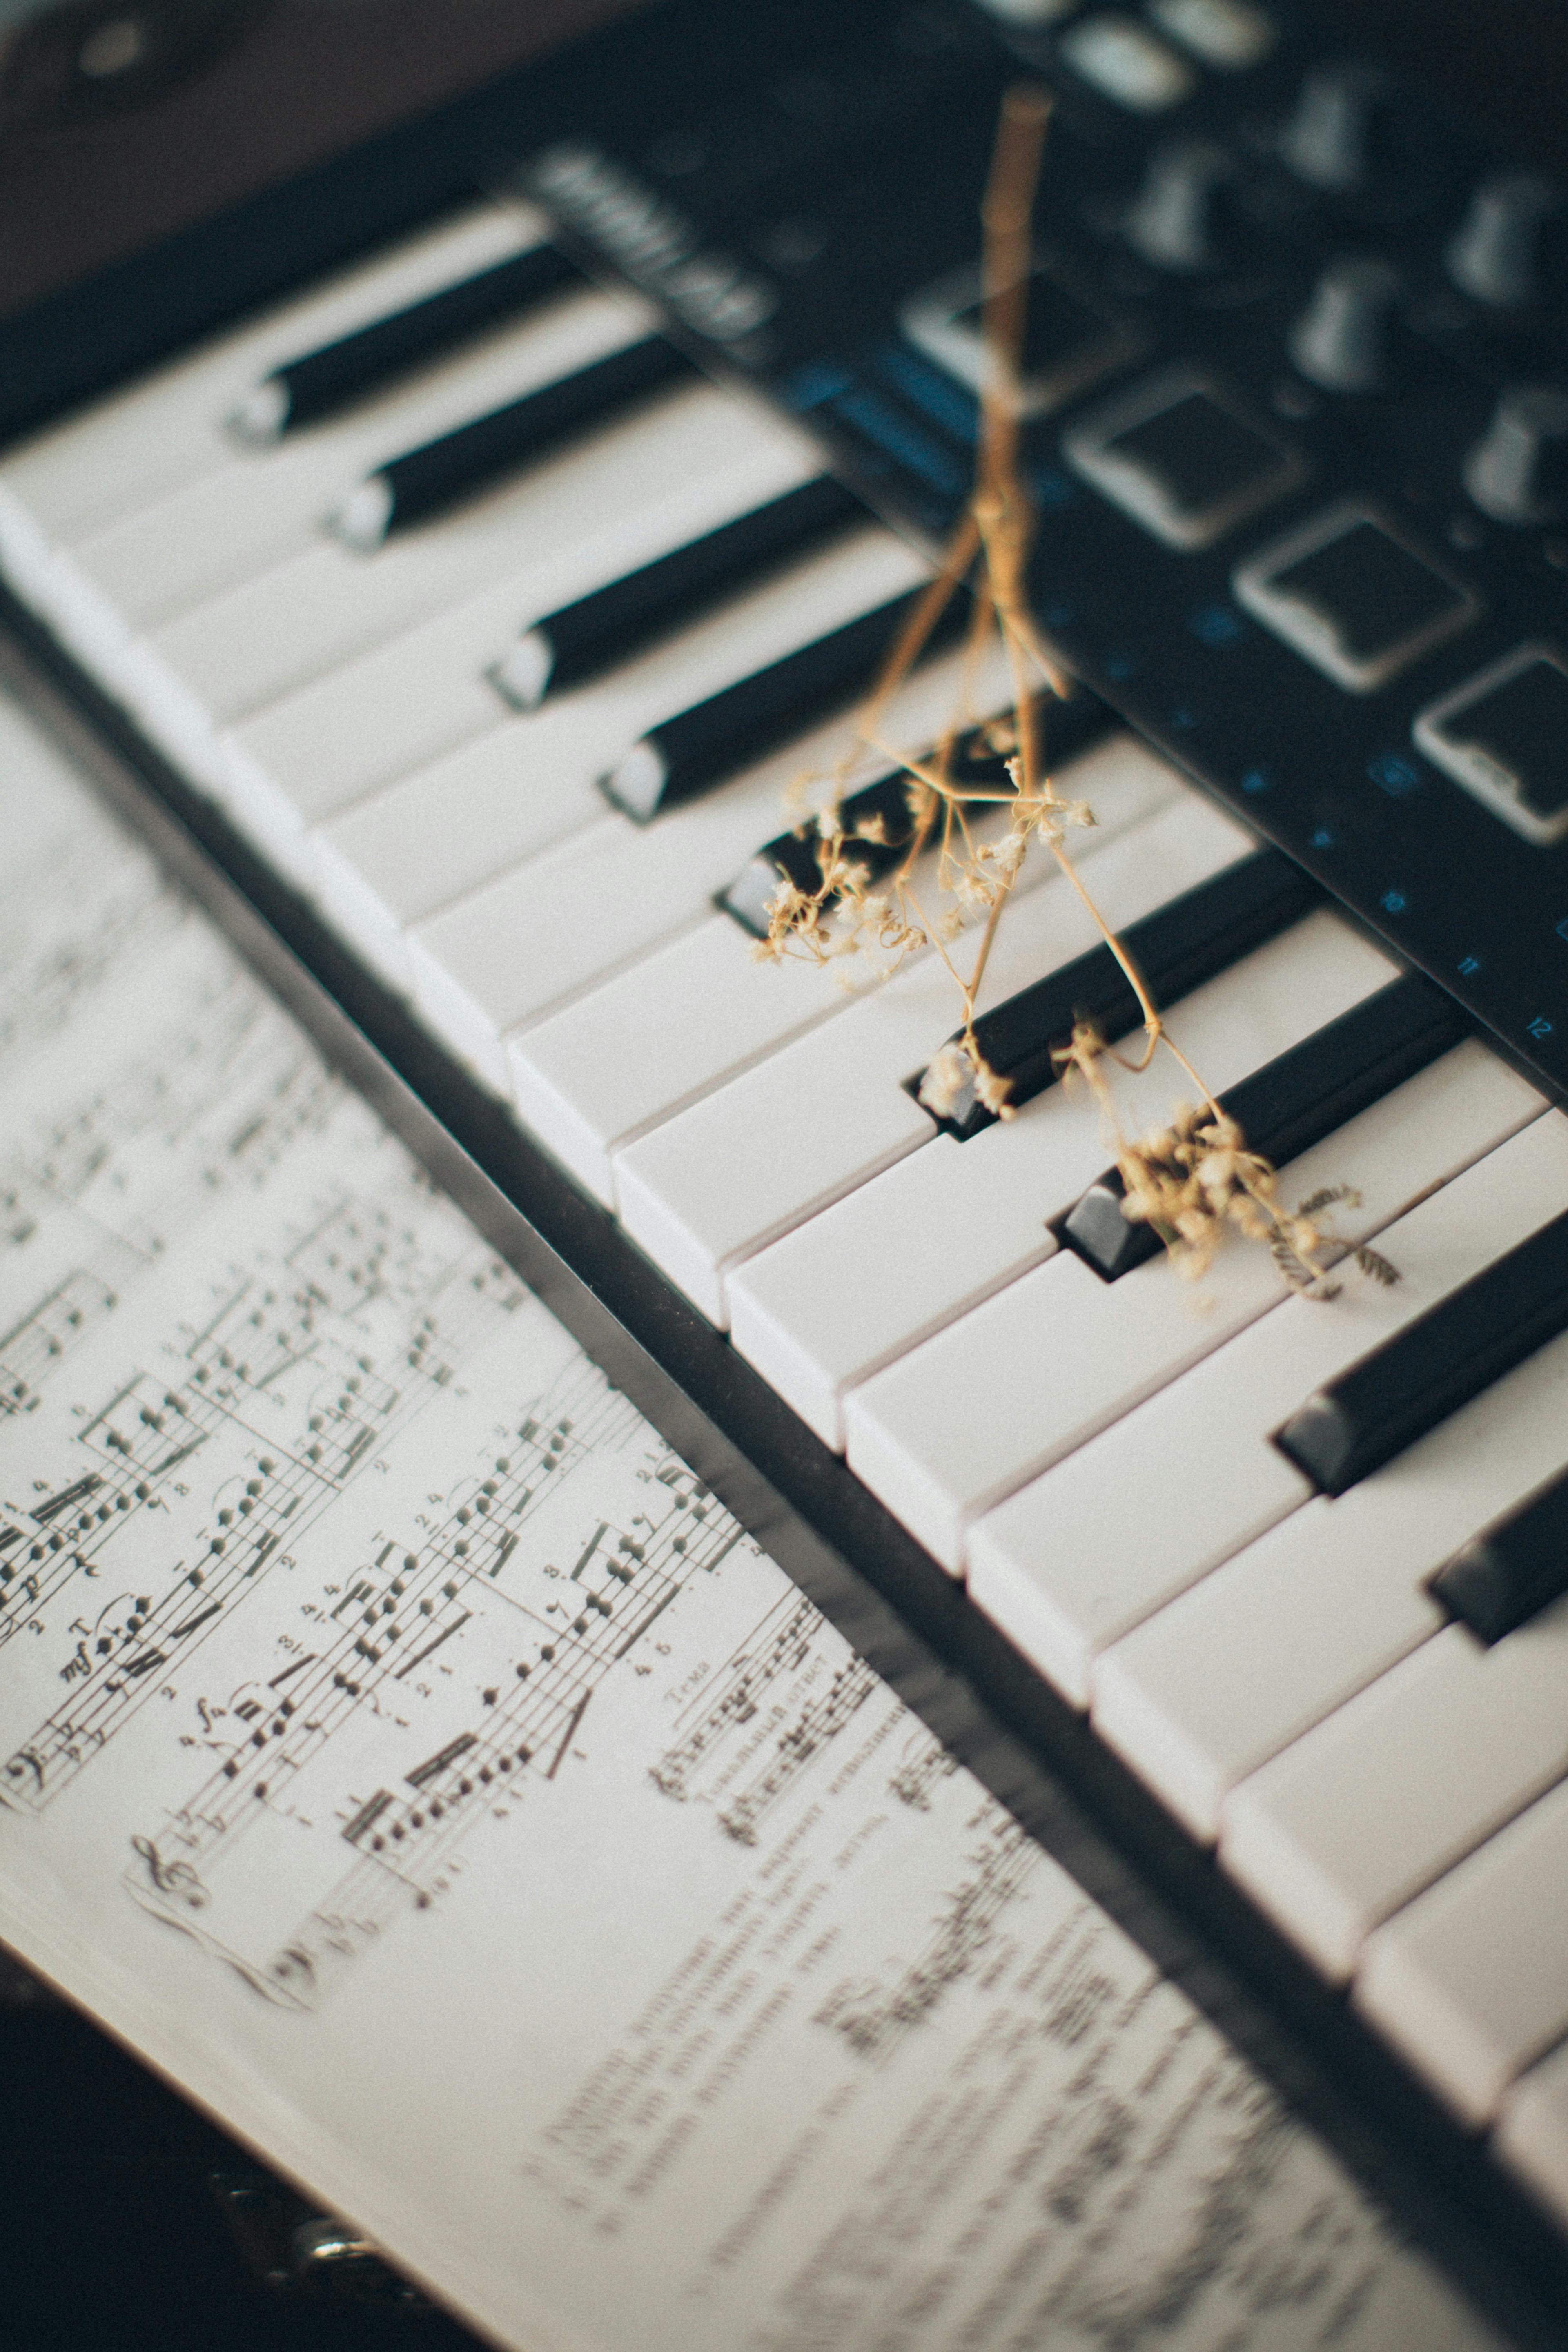 500 Music Wallpaper Pictures HD  Download Free Images on Unsplash